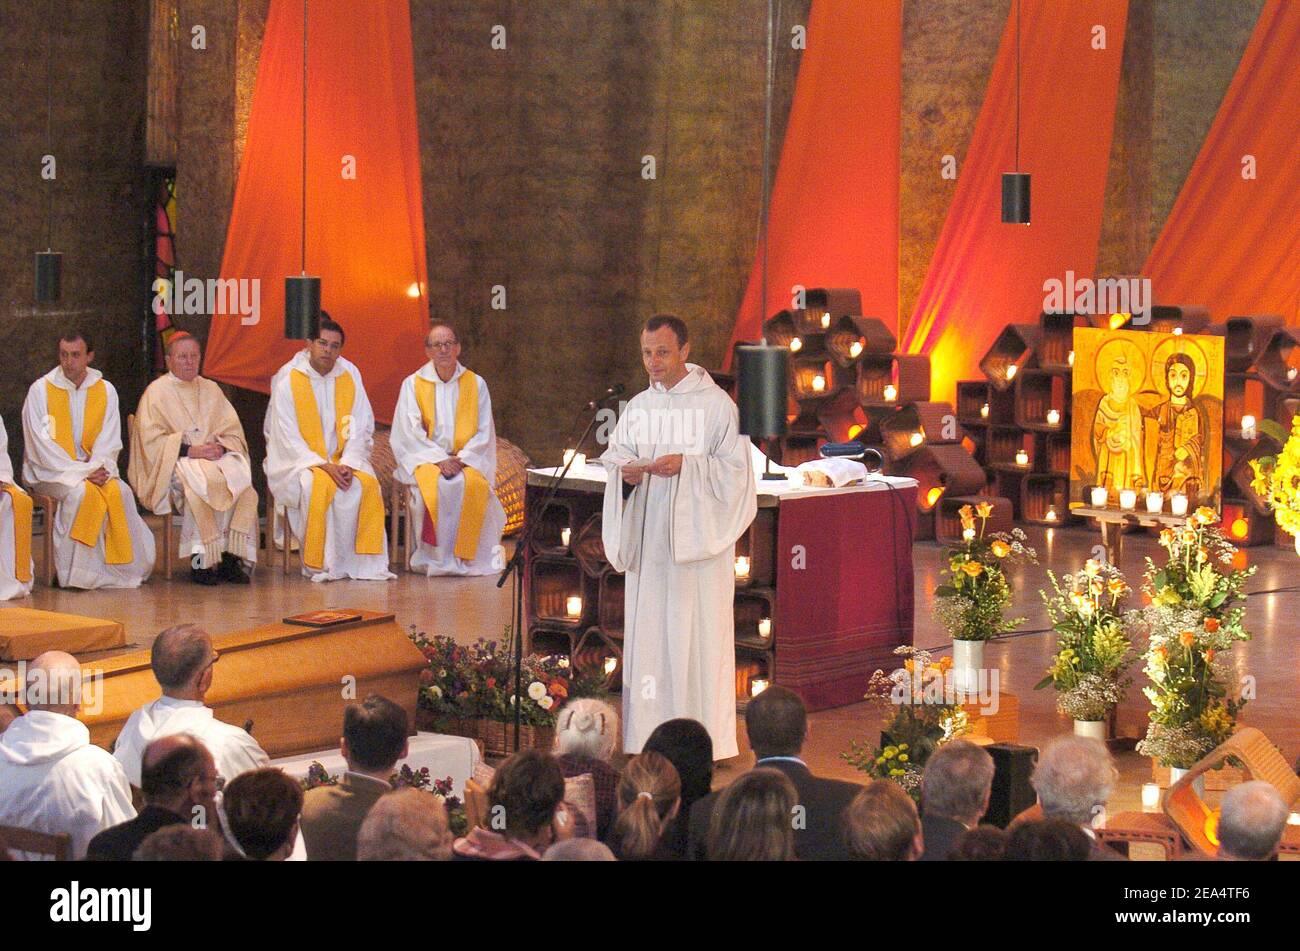 Brother Alois holds the funeral service for Brother Roger Schutz, the leader of the Taize ecumenical community, at the community's Reconciliation church in Taize, central France, on August 23, 2005. Brother Roger, 90, was slain last week when a 36-year-old mentally disturbed Romanian woman slit his throat in front of 2,500 pilgrims praying at the church. Brother Alois succeds to Brother Roger at the head of the community. Photo by Bruno Klein/ABACAPRESS.COM Stock Photo